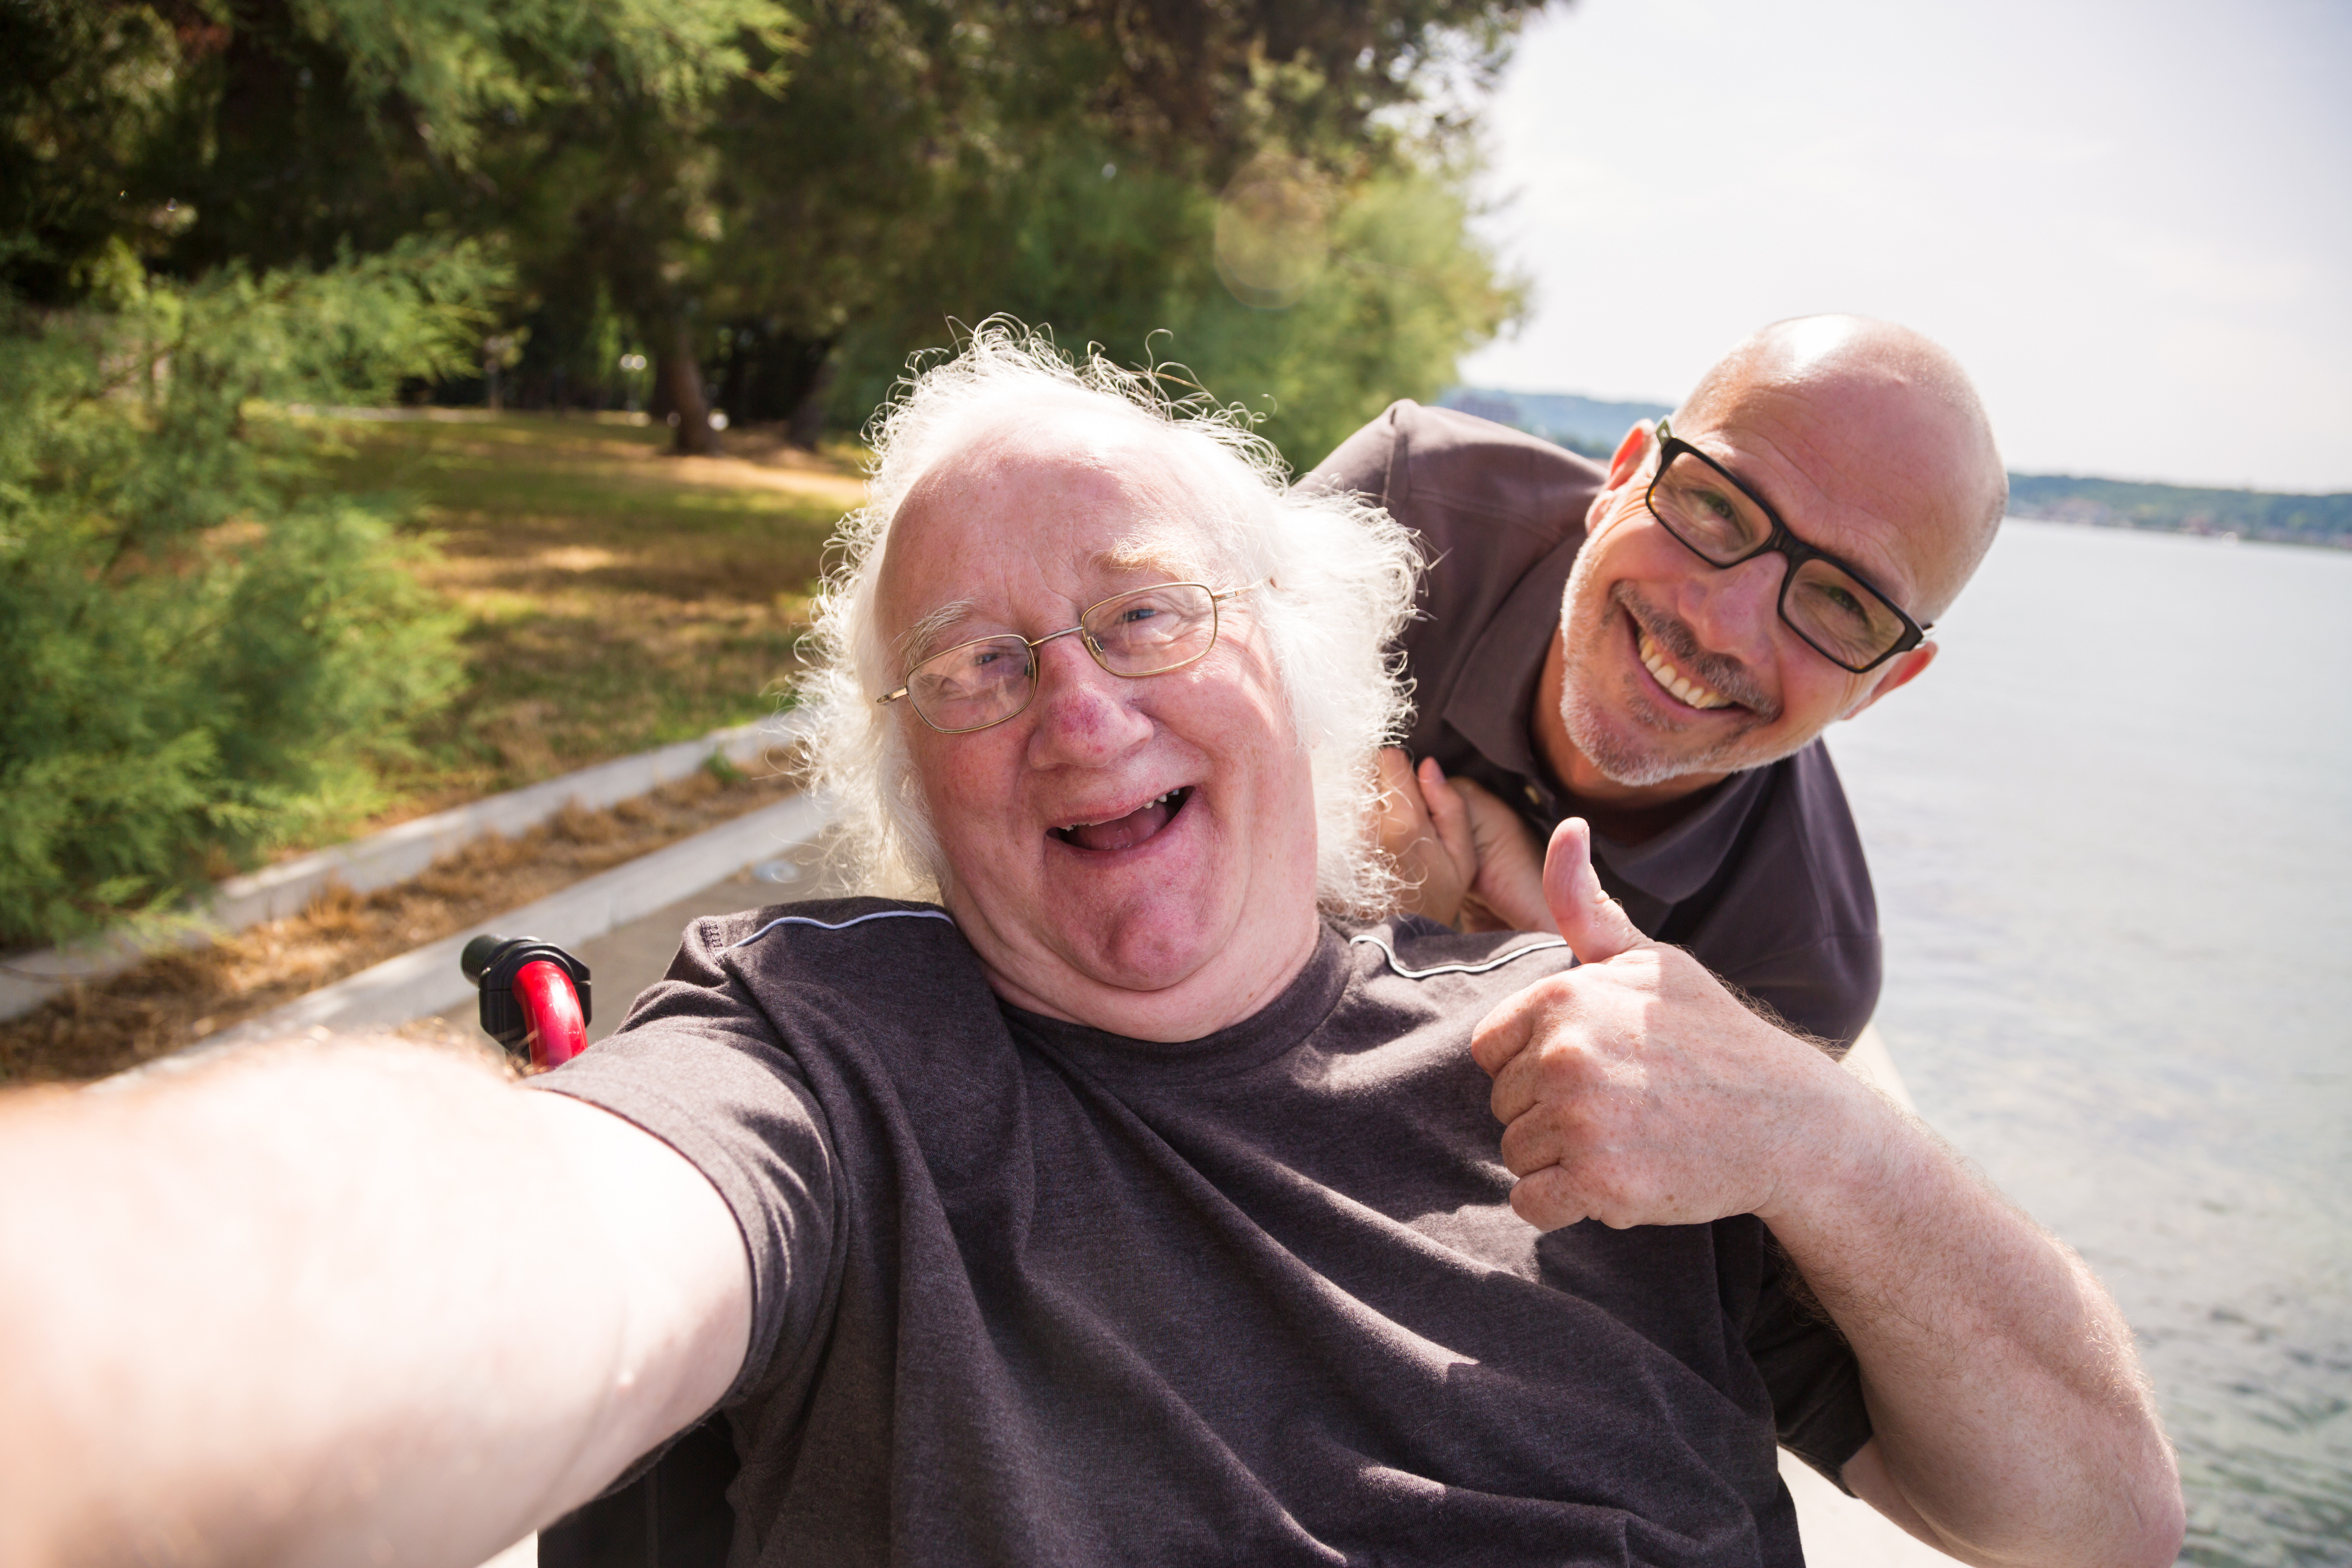 Source: iStock - Selfie taken by man using a wheelchair with a friend